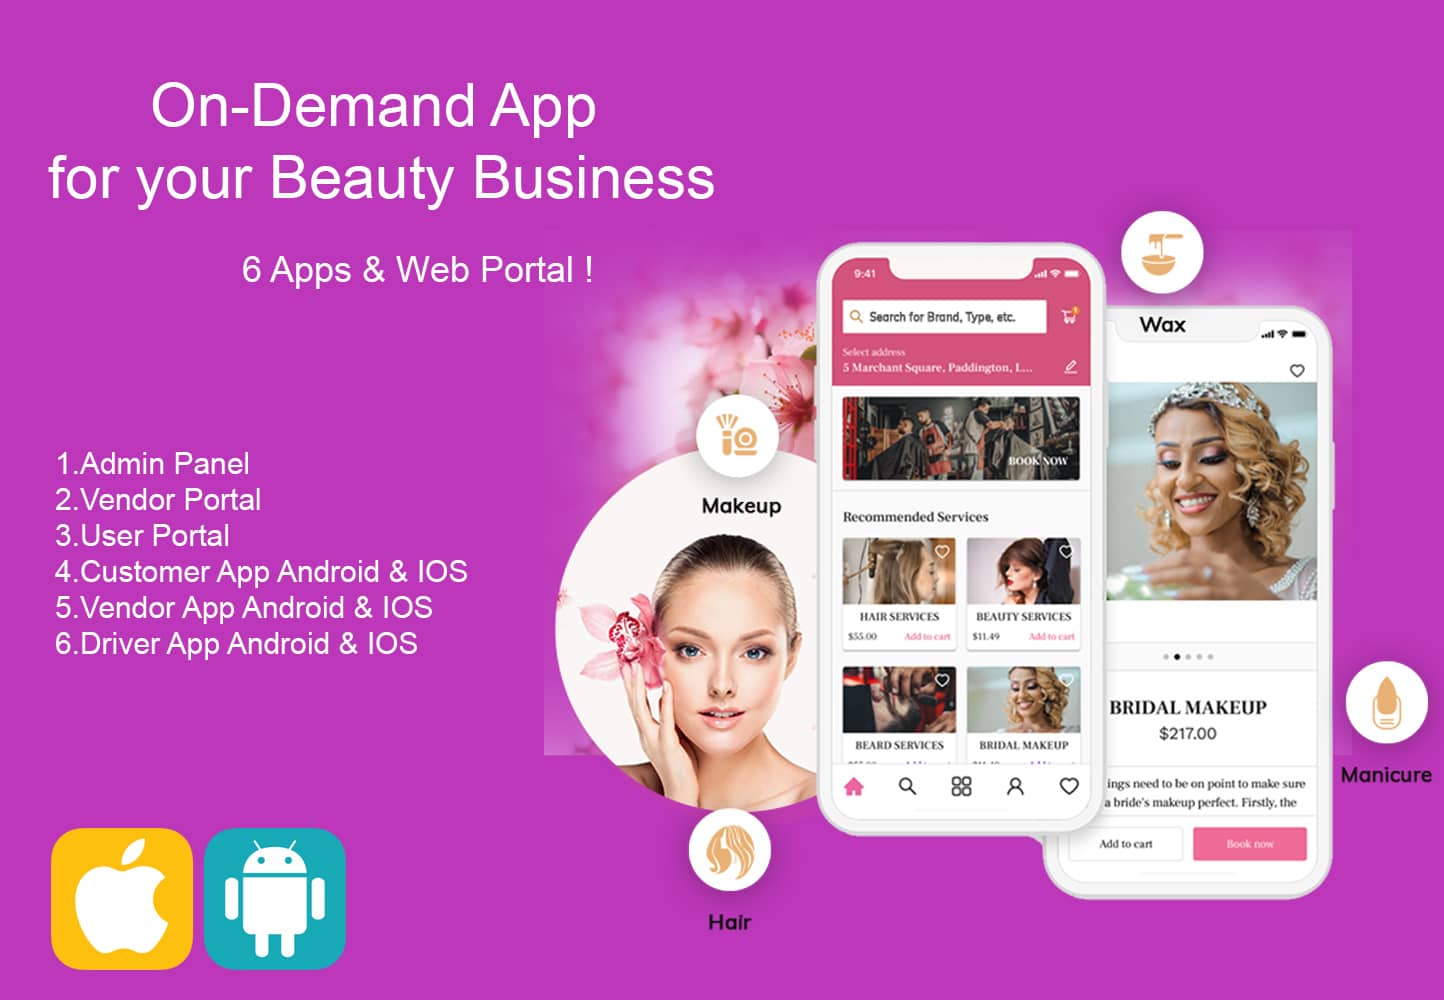 On-Demand App for your Beauty Business